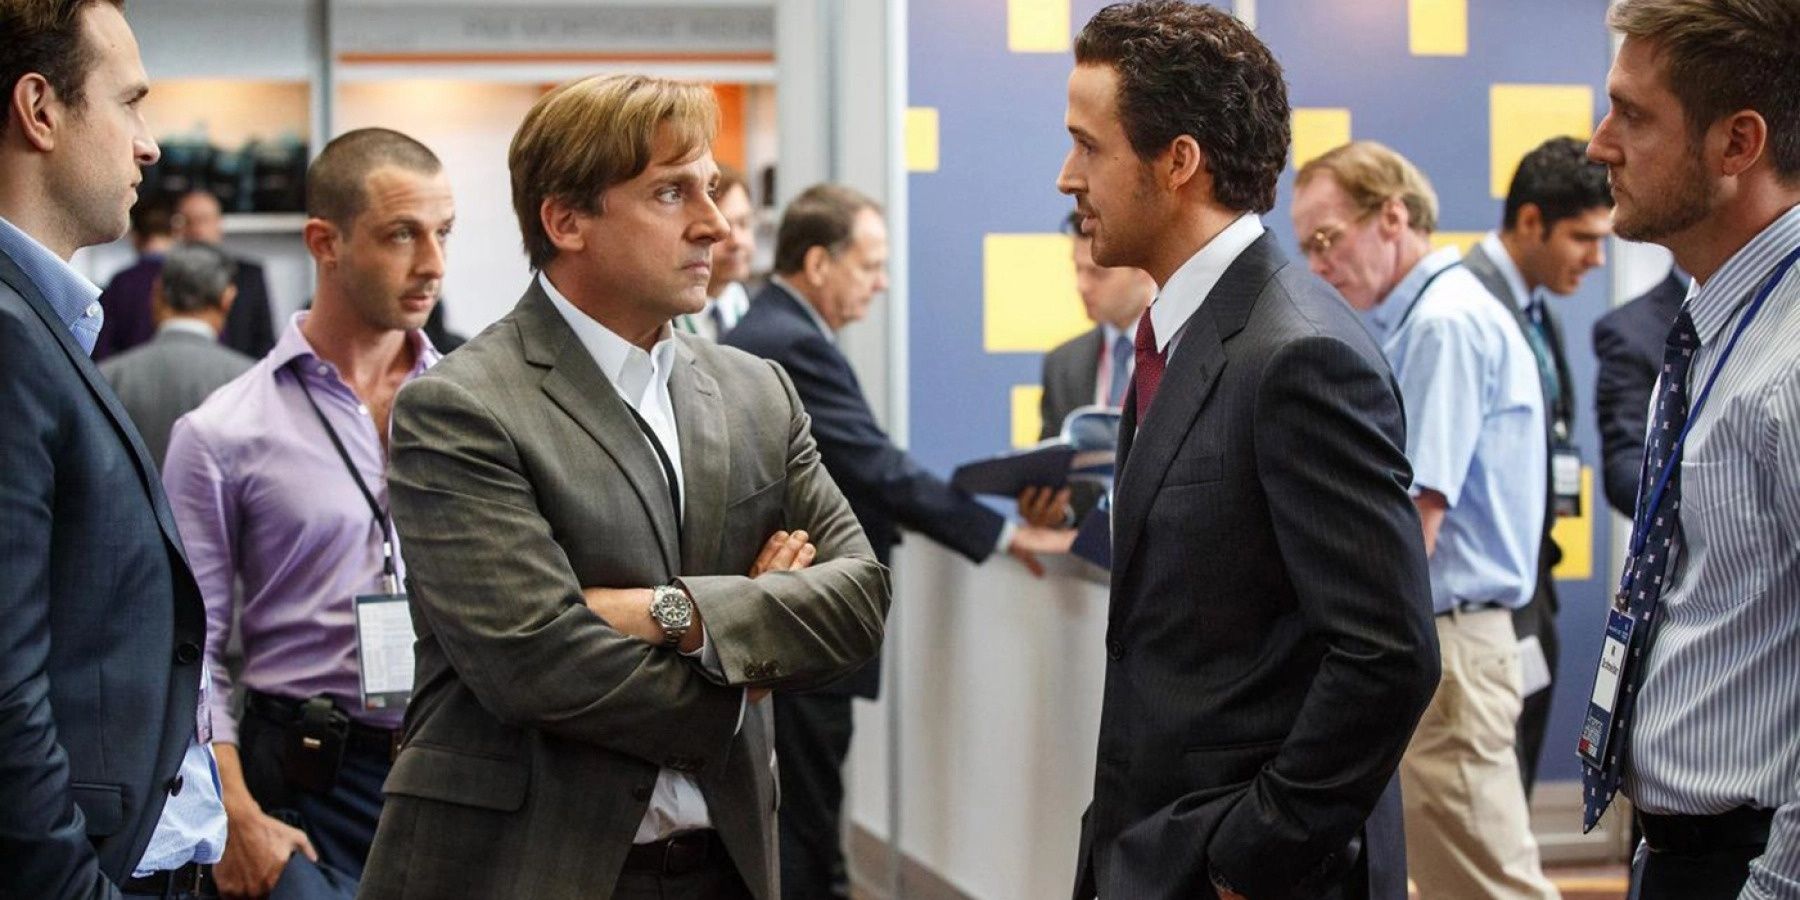 Adam McKay Compares His New Film Don’t Look Up to The Other Guys & The Big Short